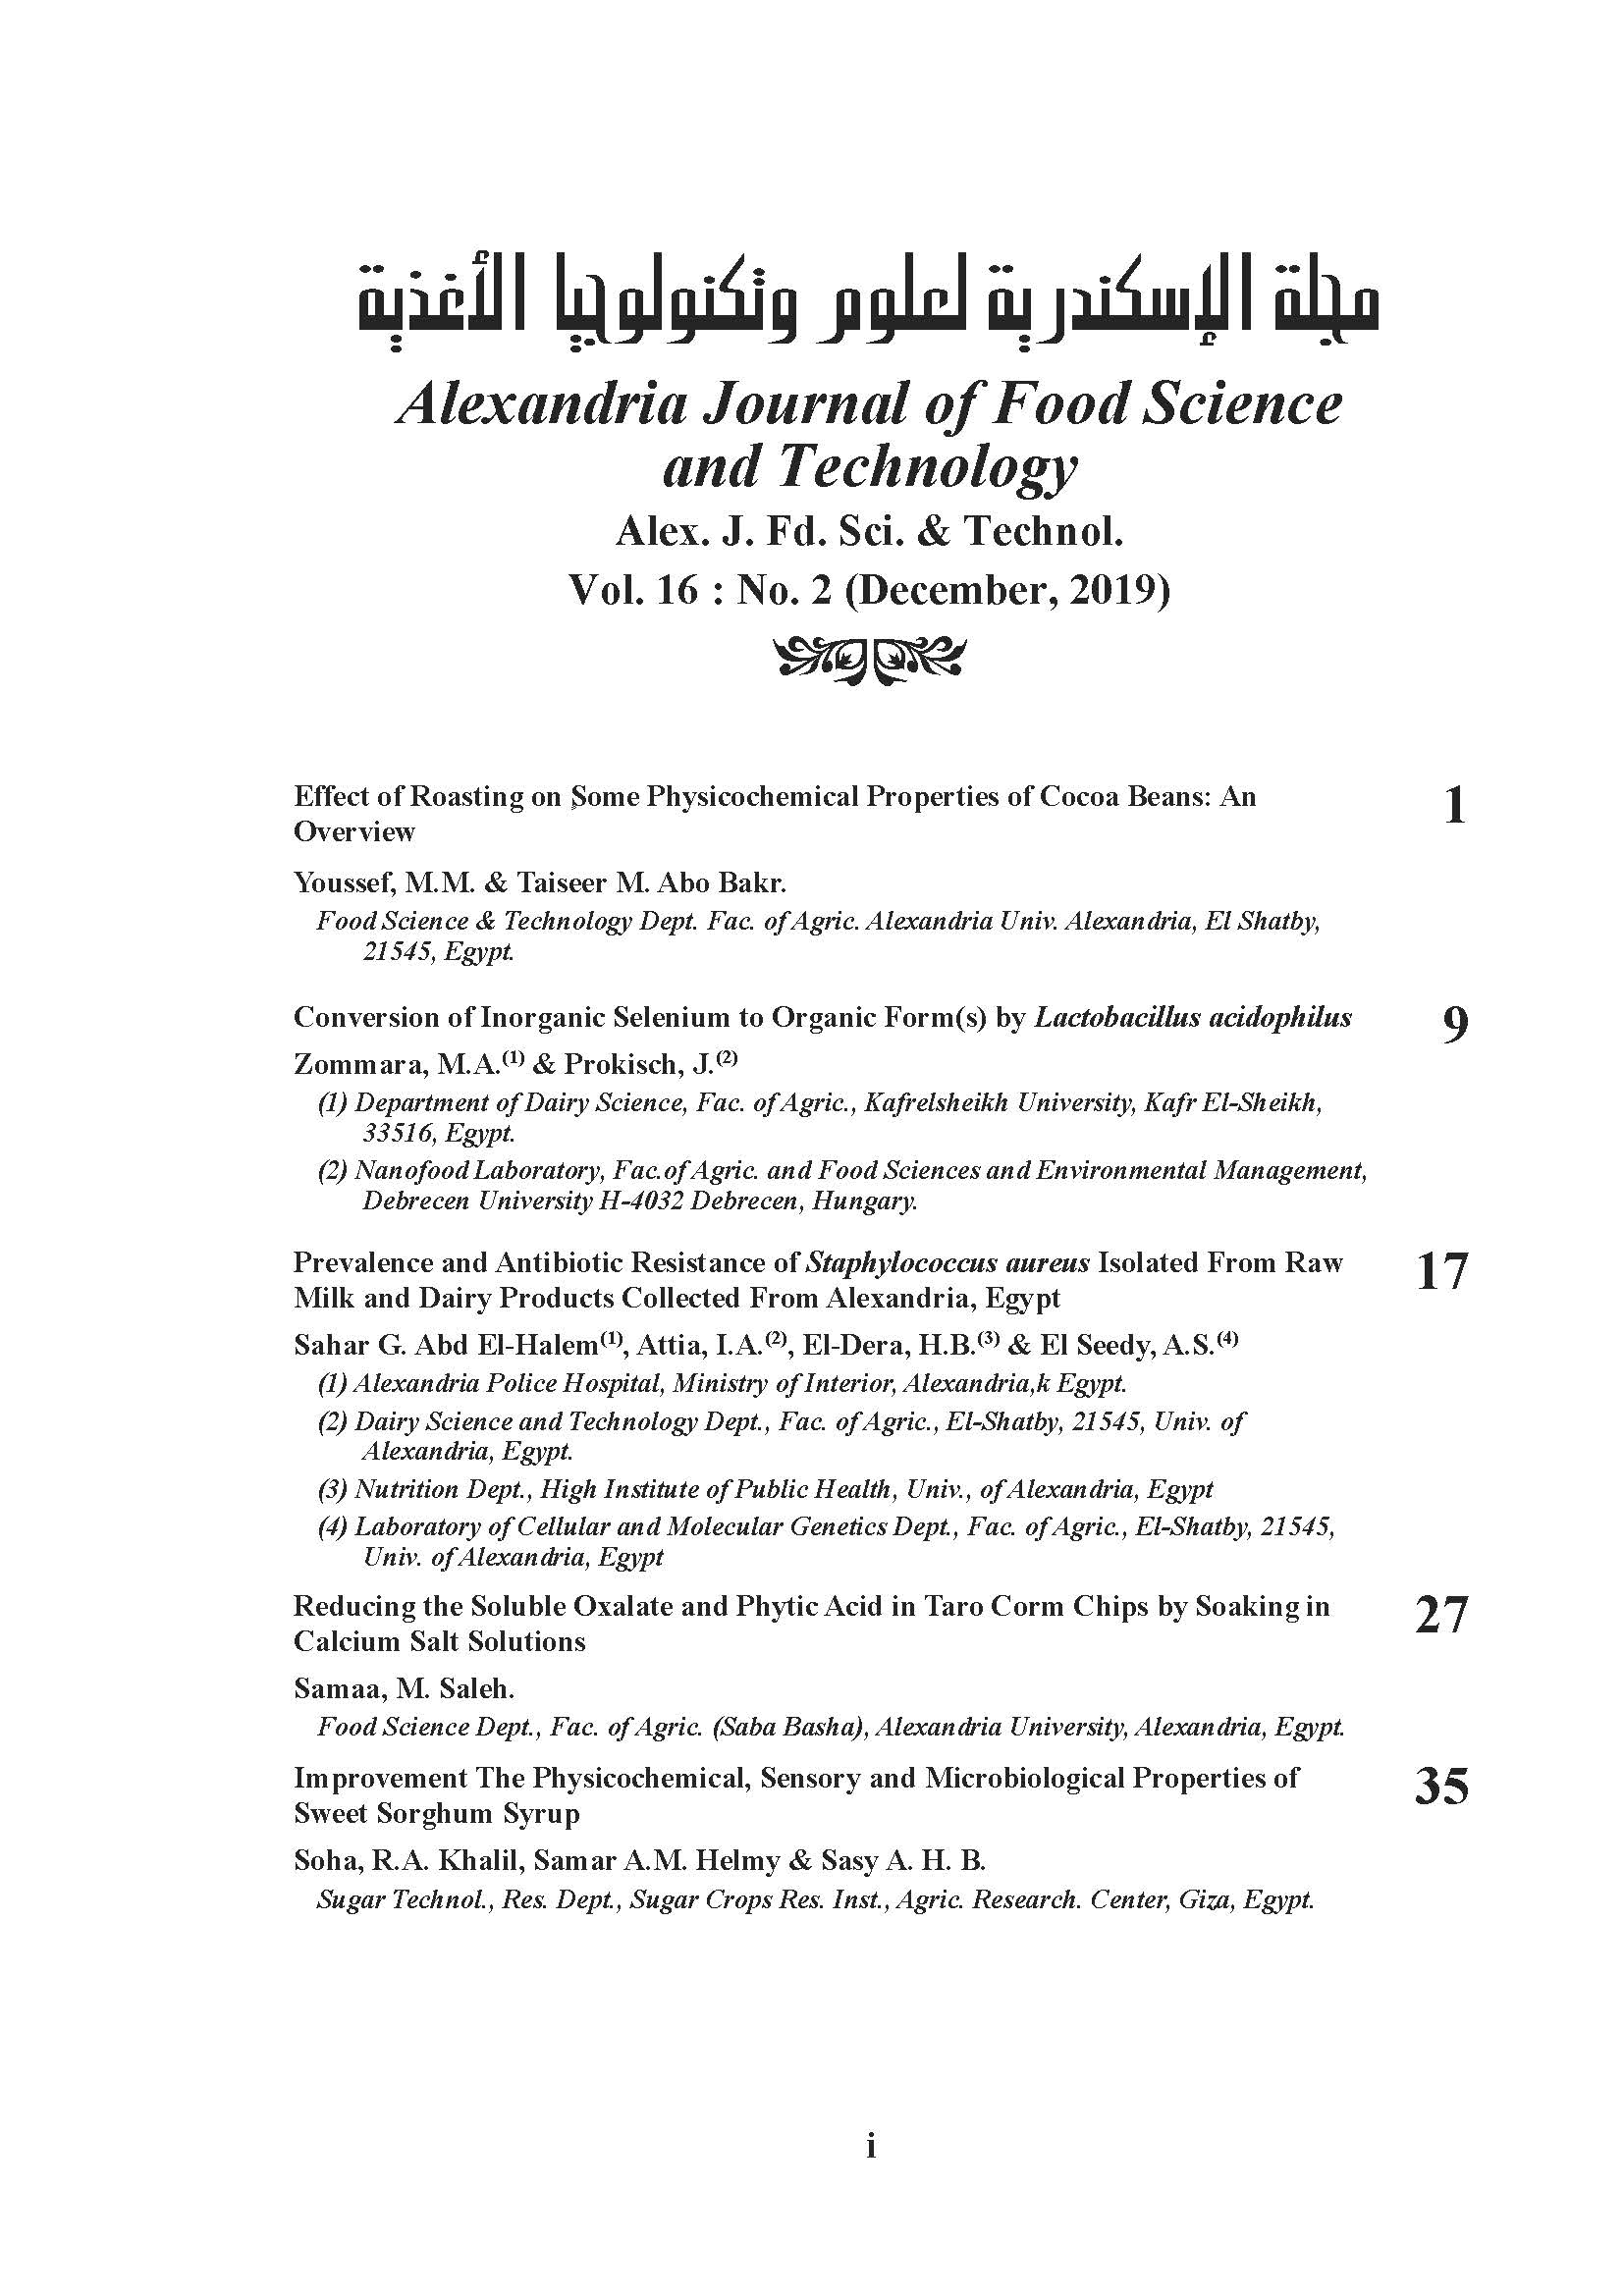 Alexandria Journal of Food Science and Technology